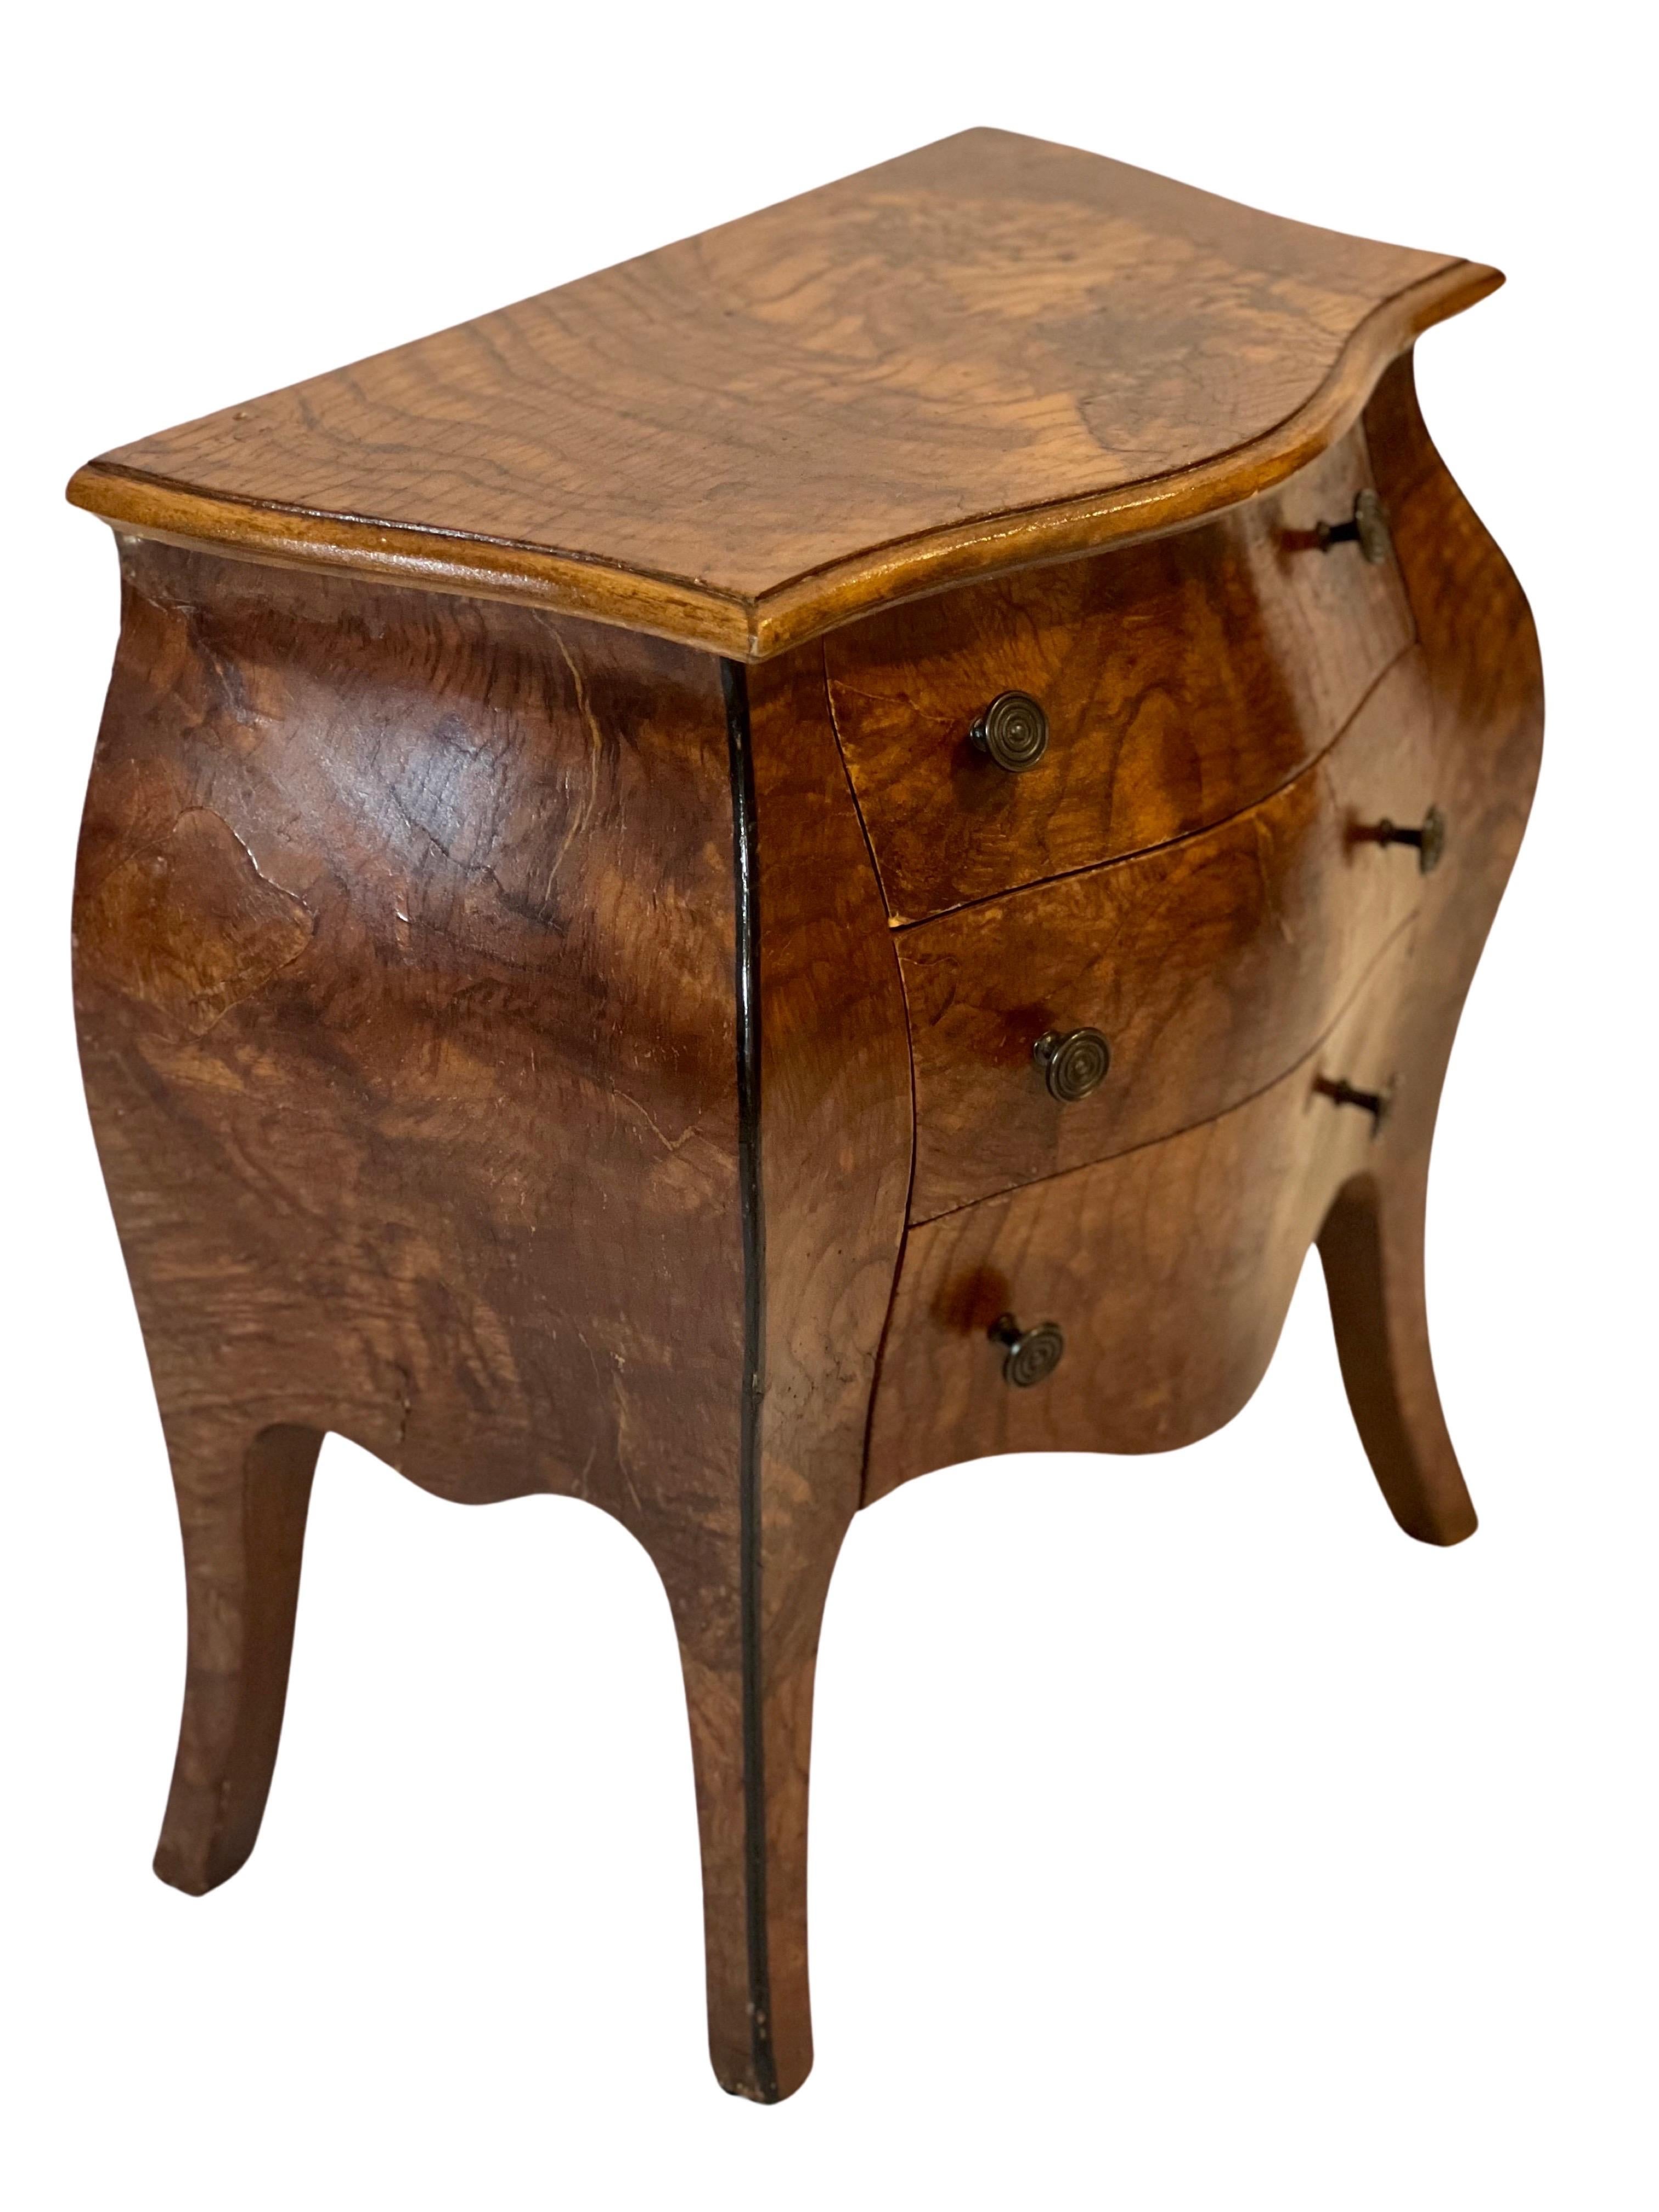 Vintage miniature Bombay chest, made in Italy, c. 1950's.

Charming Louis XV style commode in beautiful olive wood and walnut burl. It features three dovetailed drawers with bronze finish concentric pulls and fleur-de-lis liner. 

An elegant and